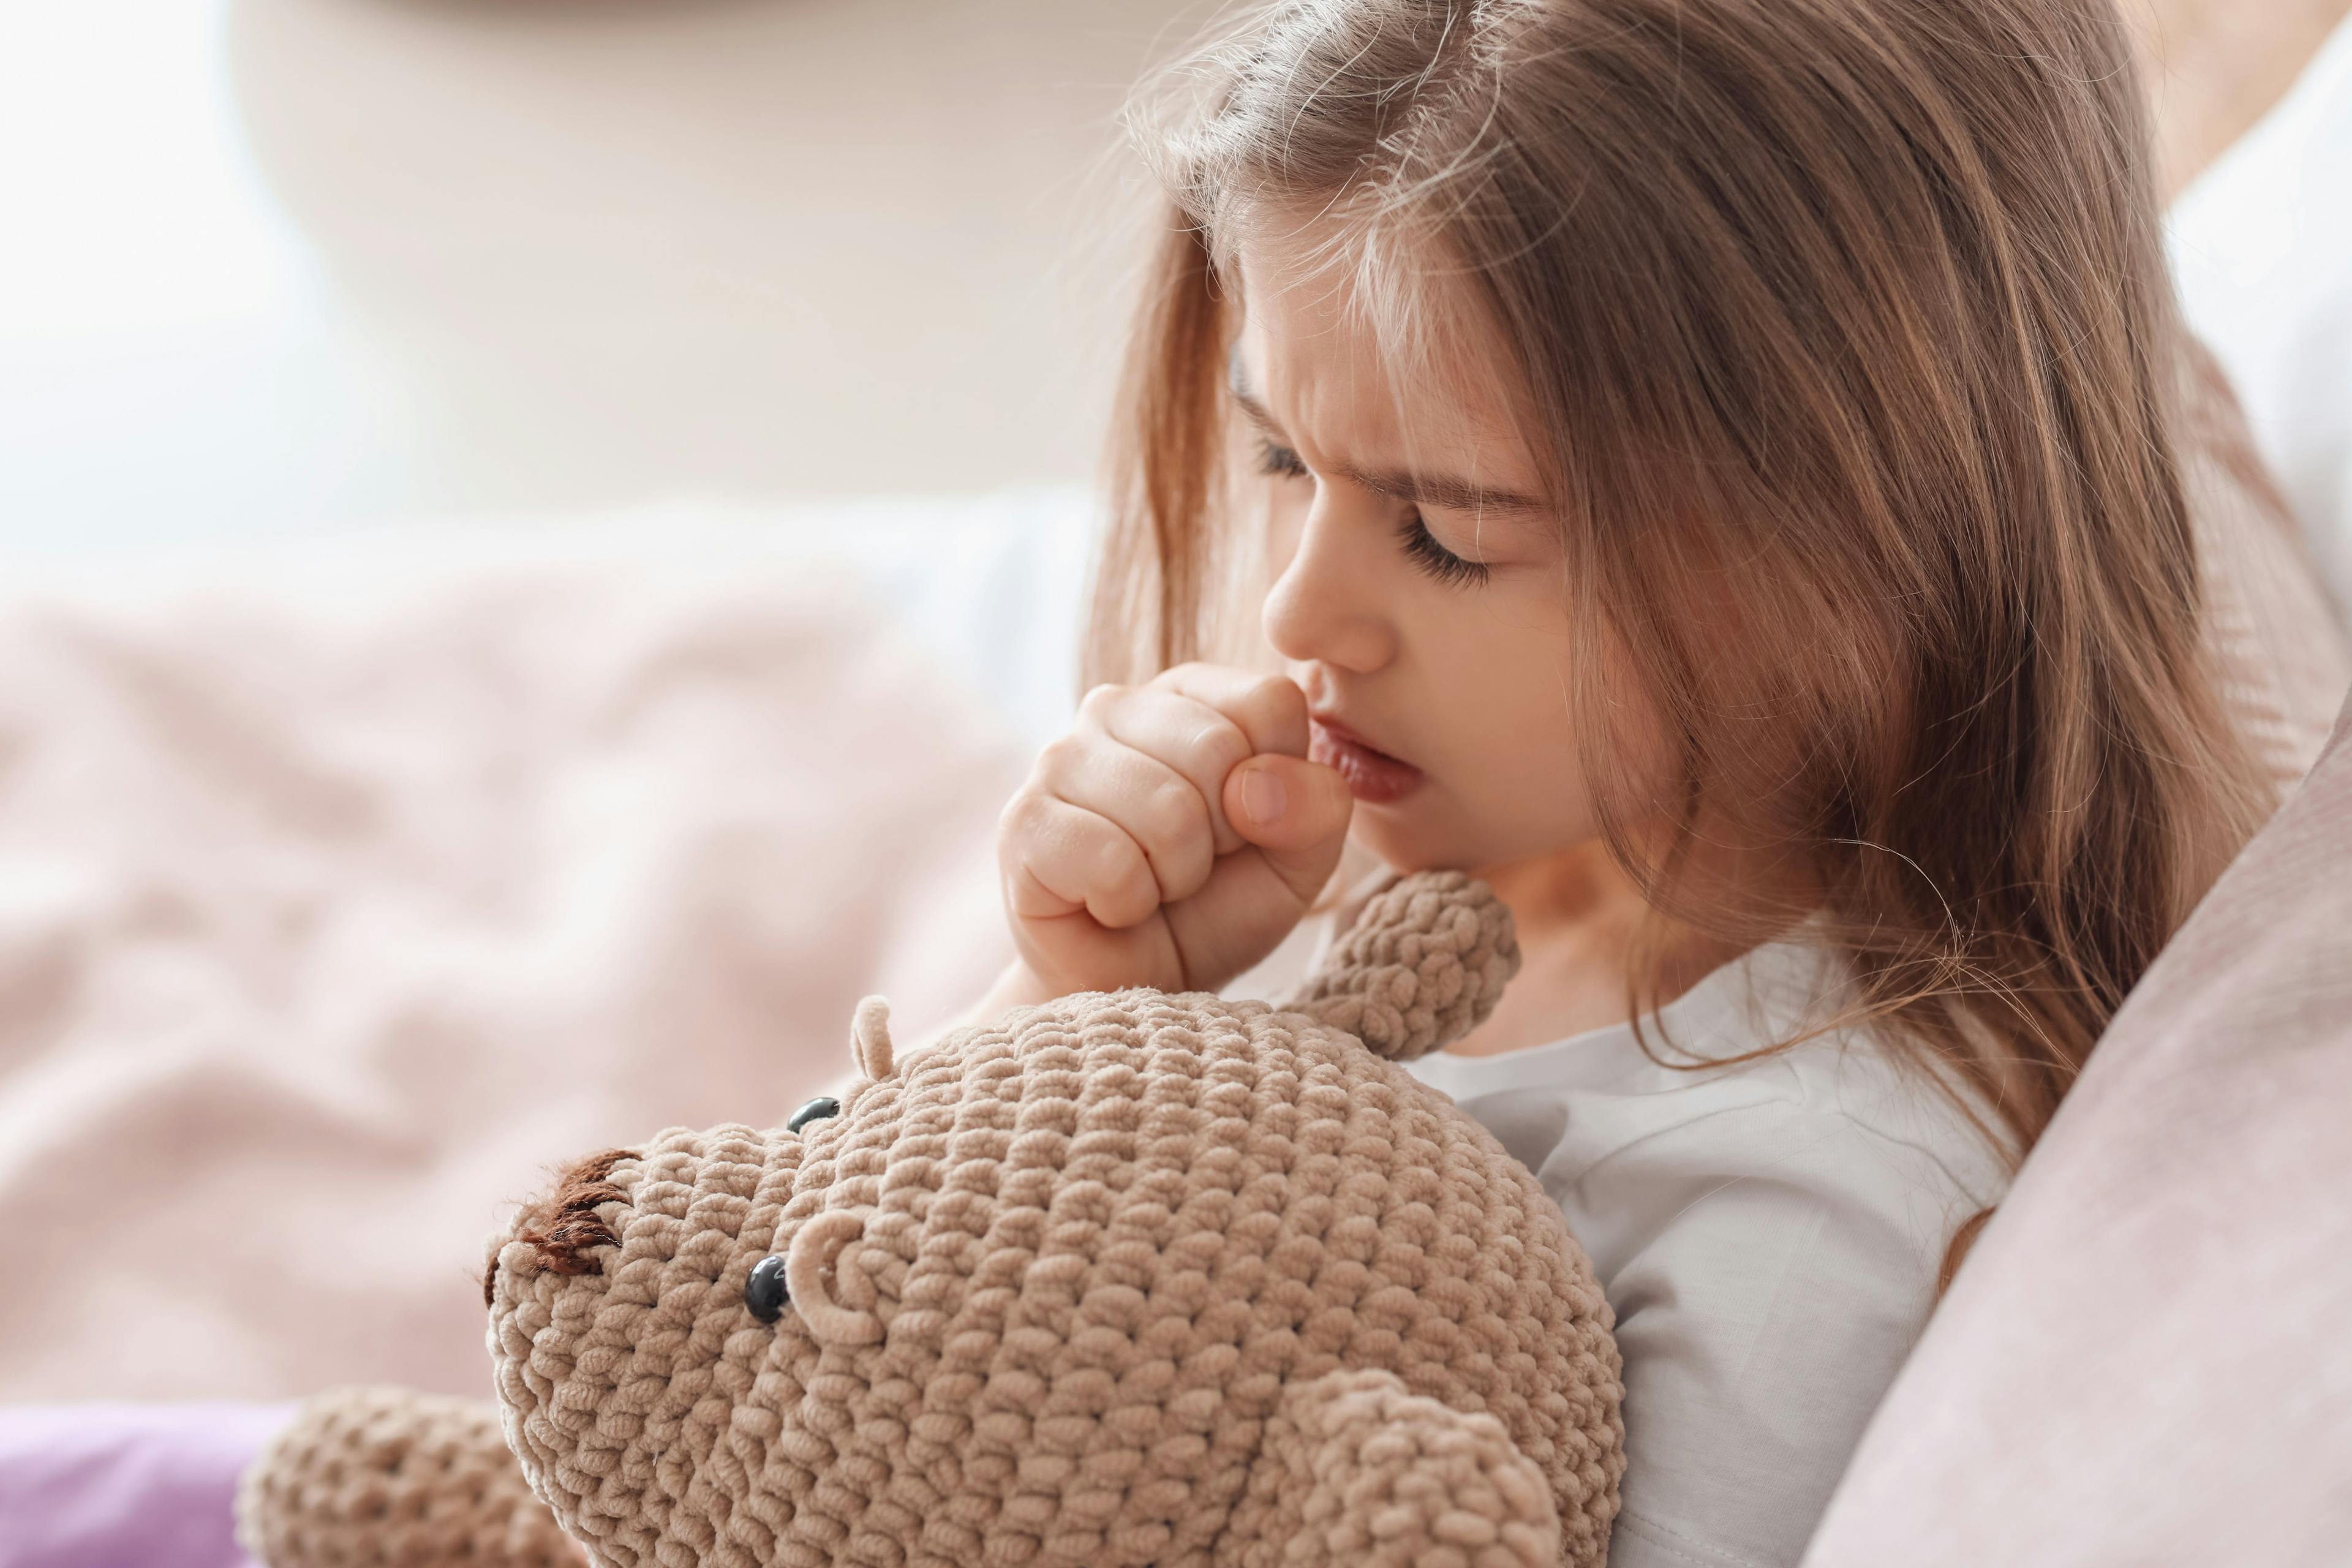 Educate Caregivers About Proper OTC Cold and Cough Medications for Children 